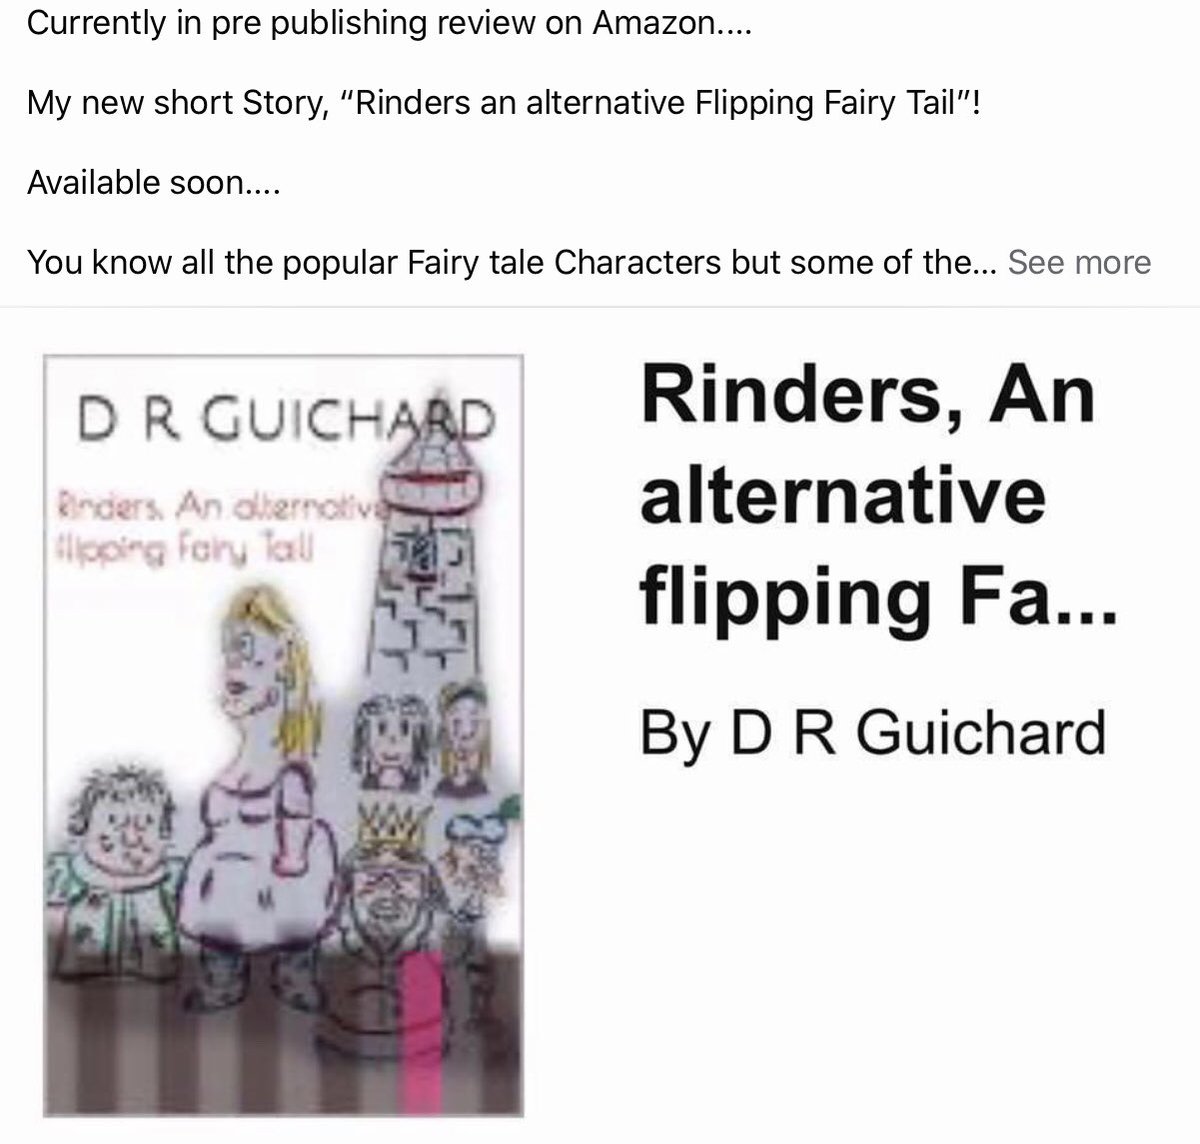 Available now @amazon A new short Story! A great Comedy read to pass the time .... #SundayThoughts #bookreview #Eurovision Rinders, An alternative flipping Fairy Tail! (Alternative Flipping Fairy Ta... amazon.co.uk/dp/B088Q2MKNQ/… via @AmazonUK